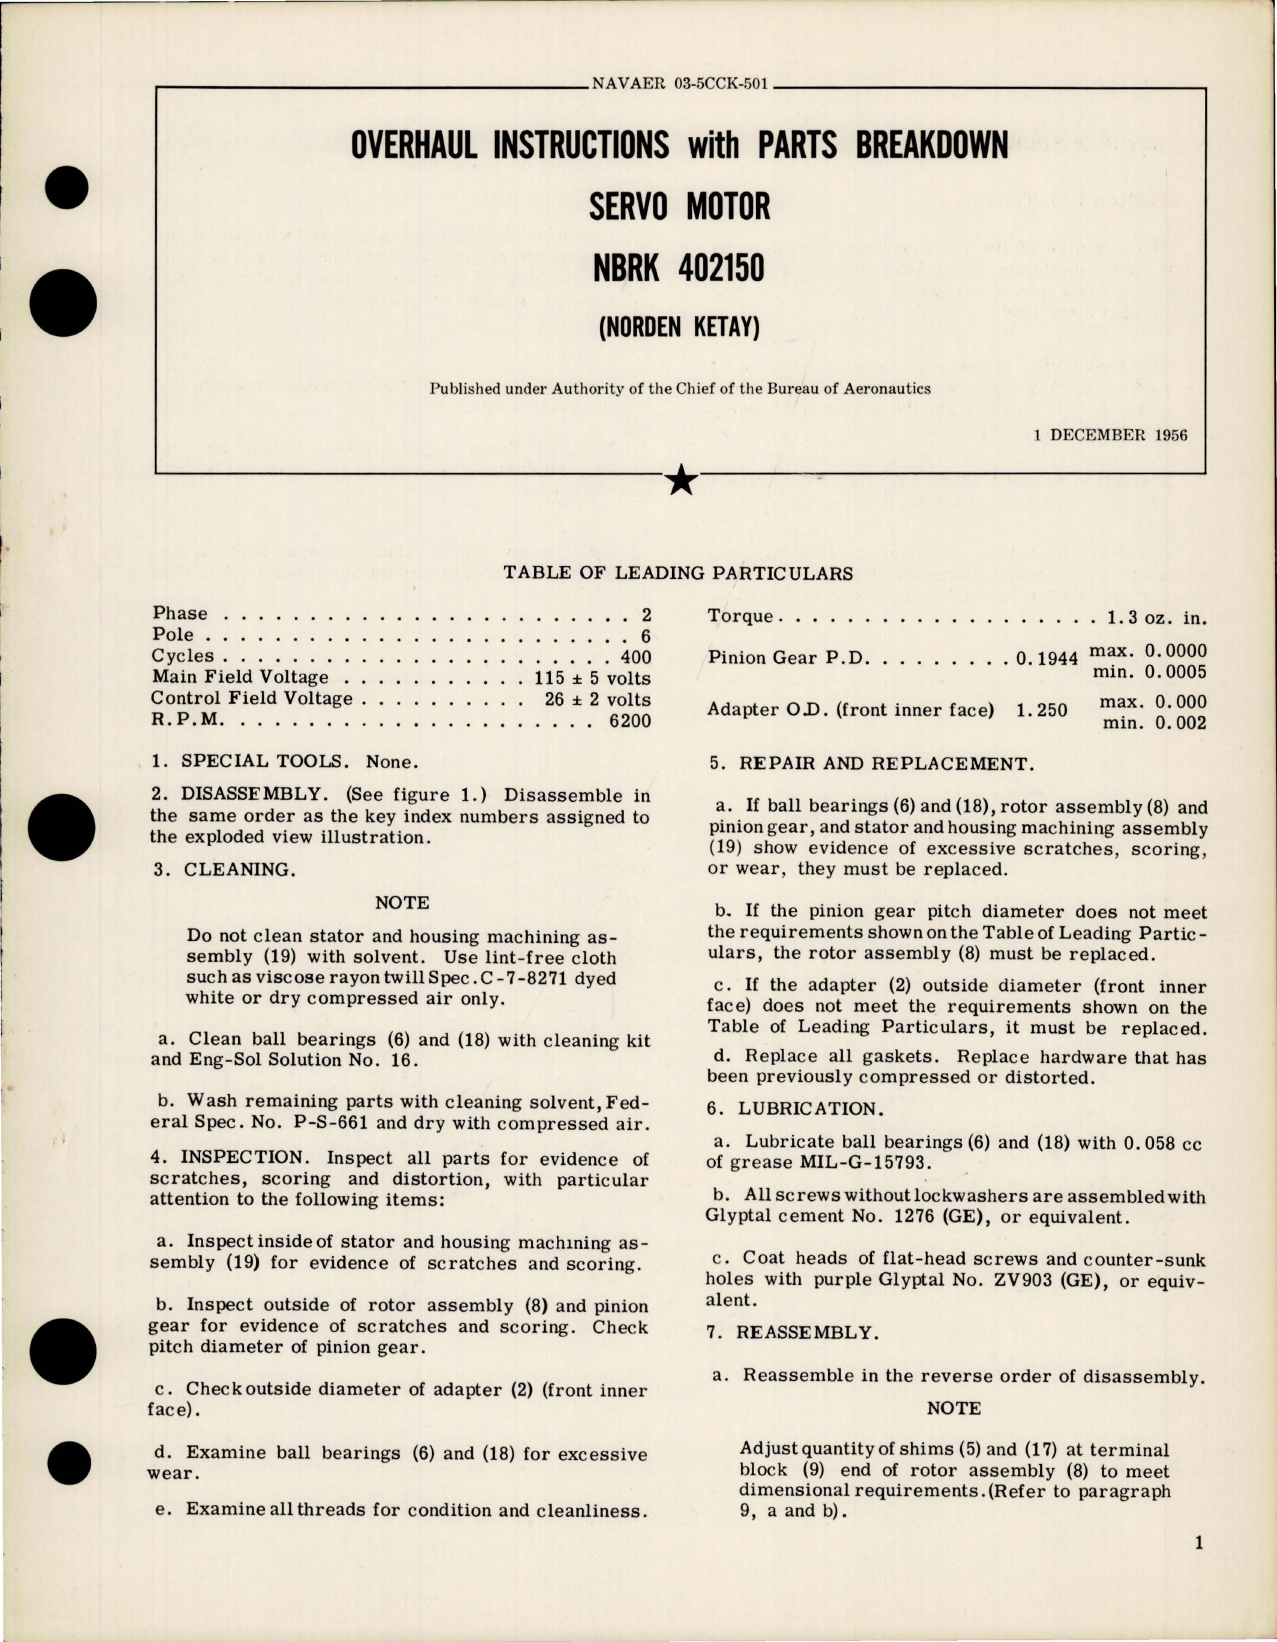 Sample page 1 from AirCorps Library document: Overhaul Instructions with Parts Breakdown for Servo Motor - NBRK 402150 